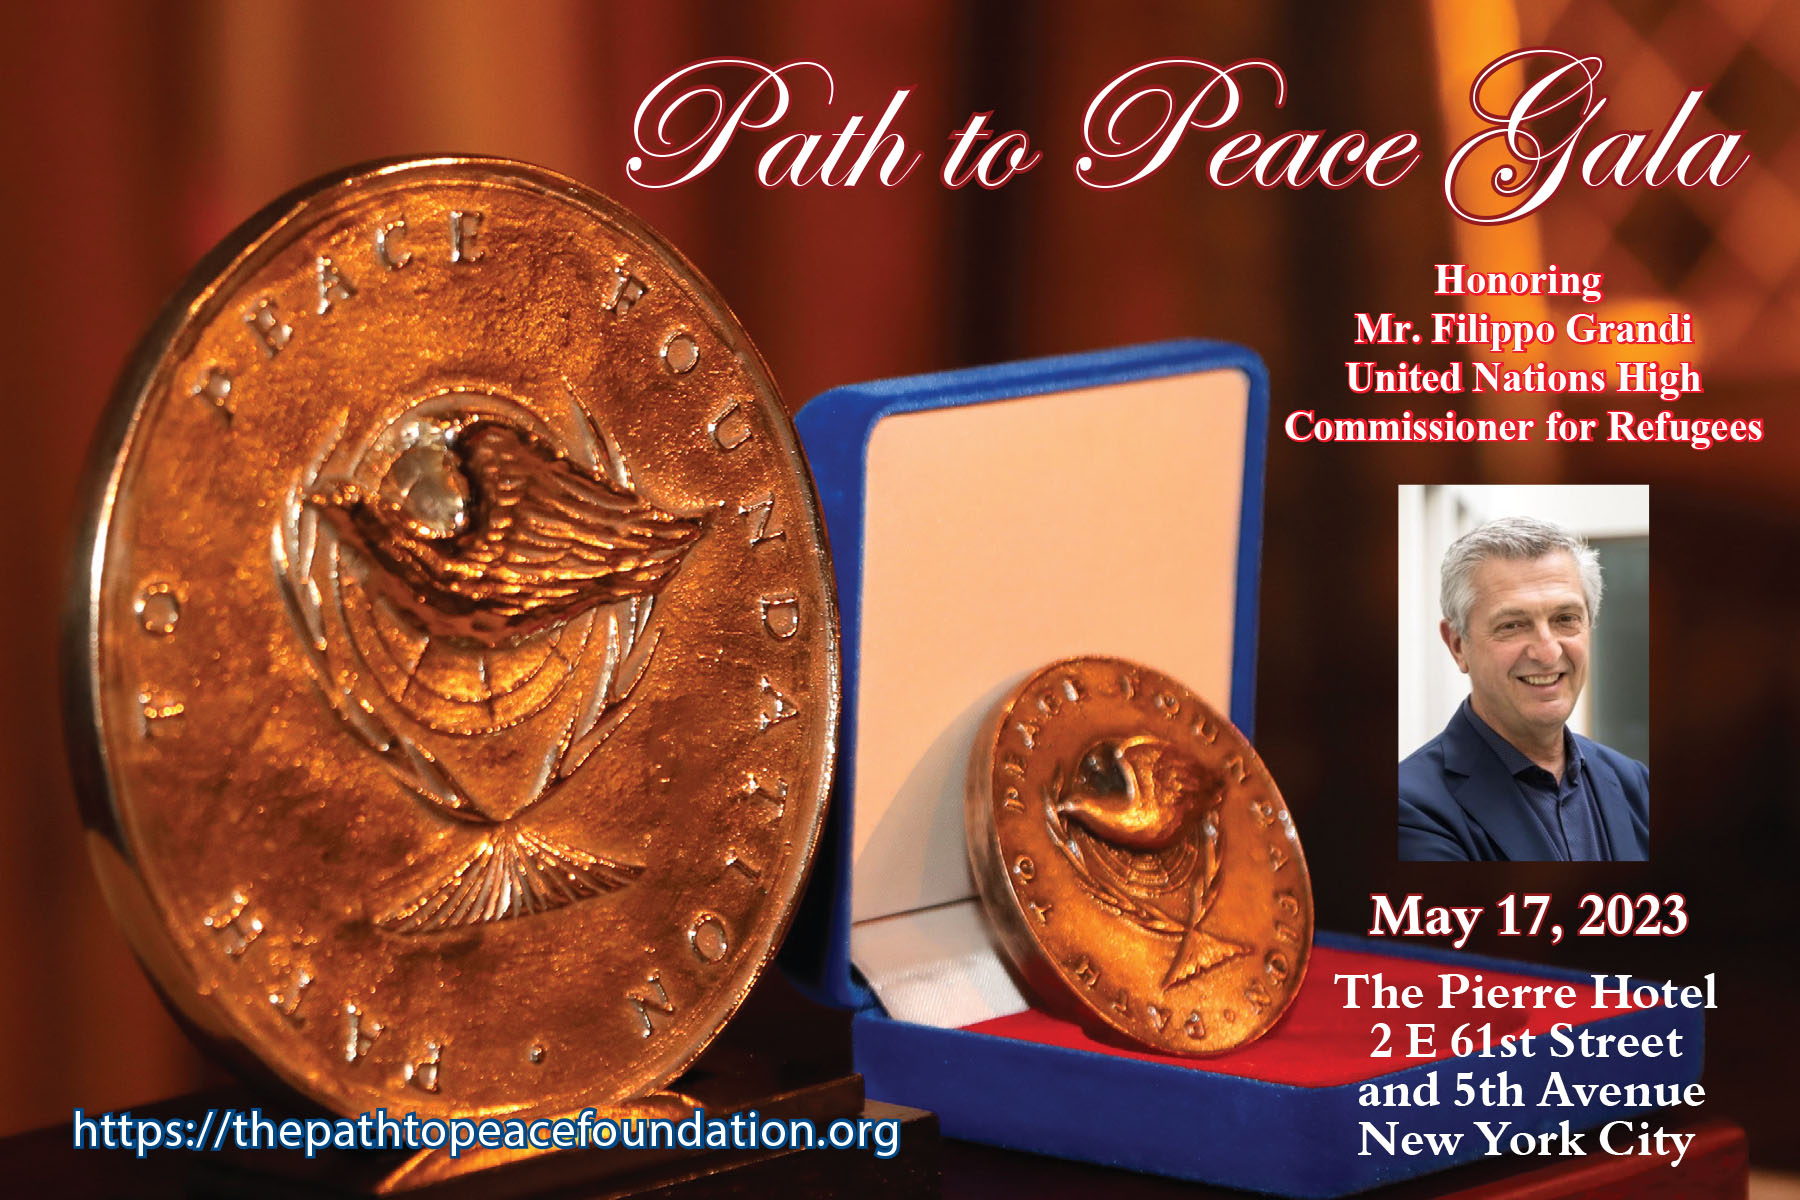 Path to Peace Gala Dinner Honoring United Nations High Commissioner for Refugees Mr. Filippo Grandi - May 17, 2023